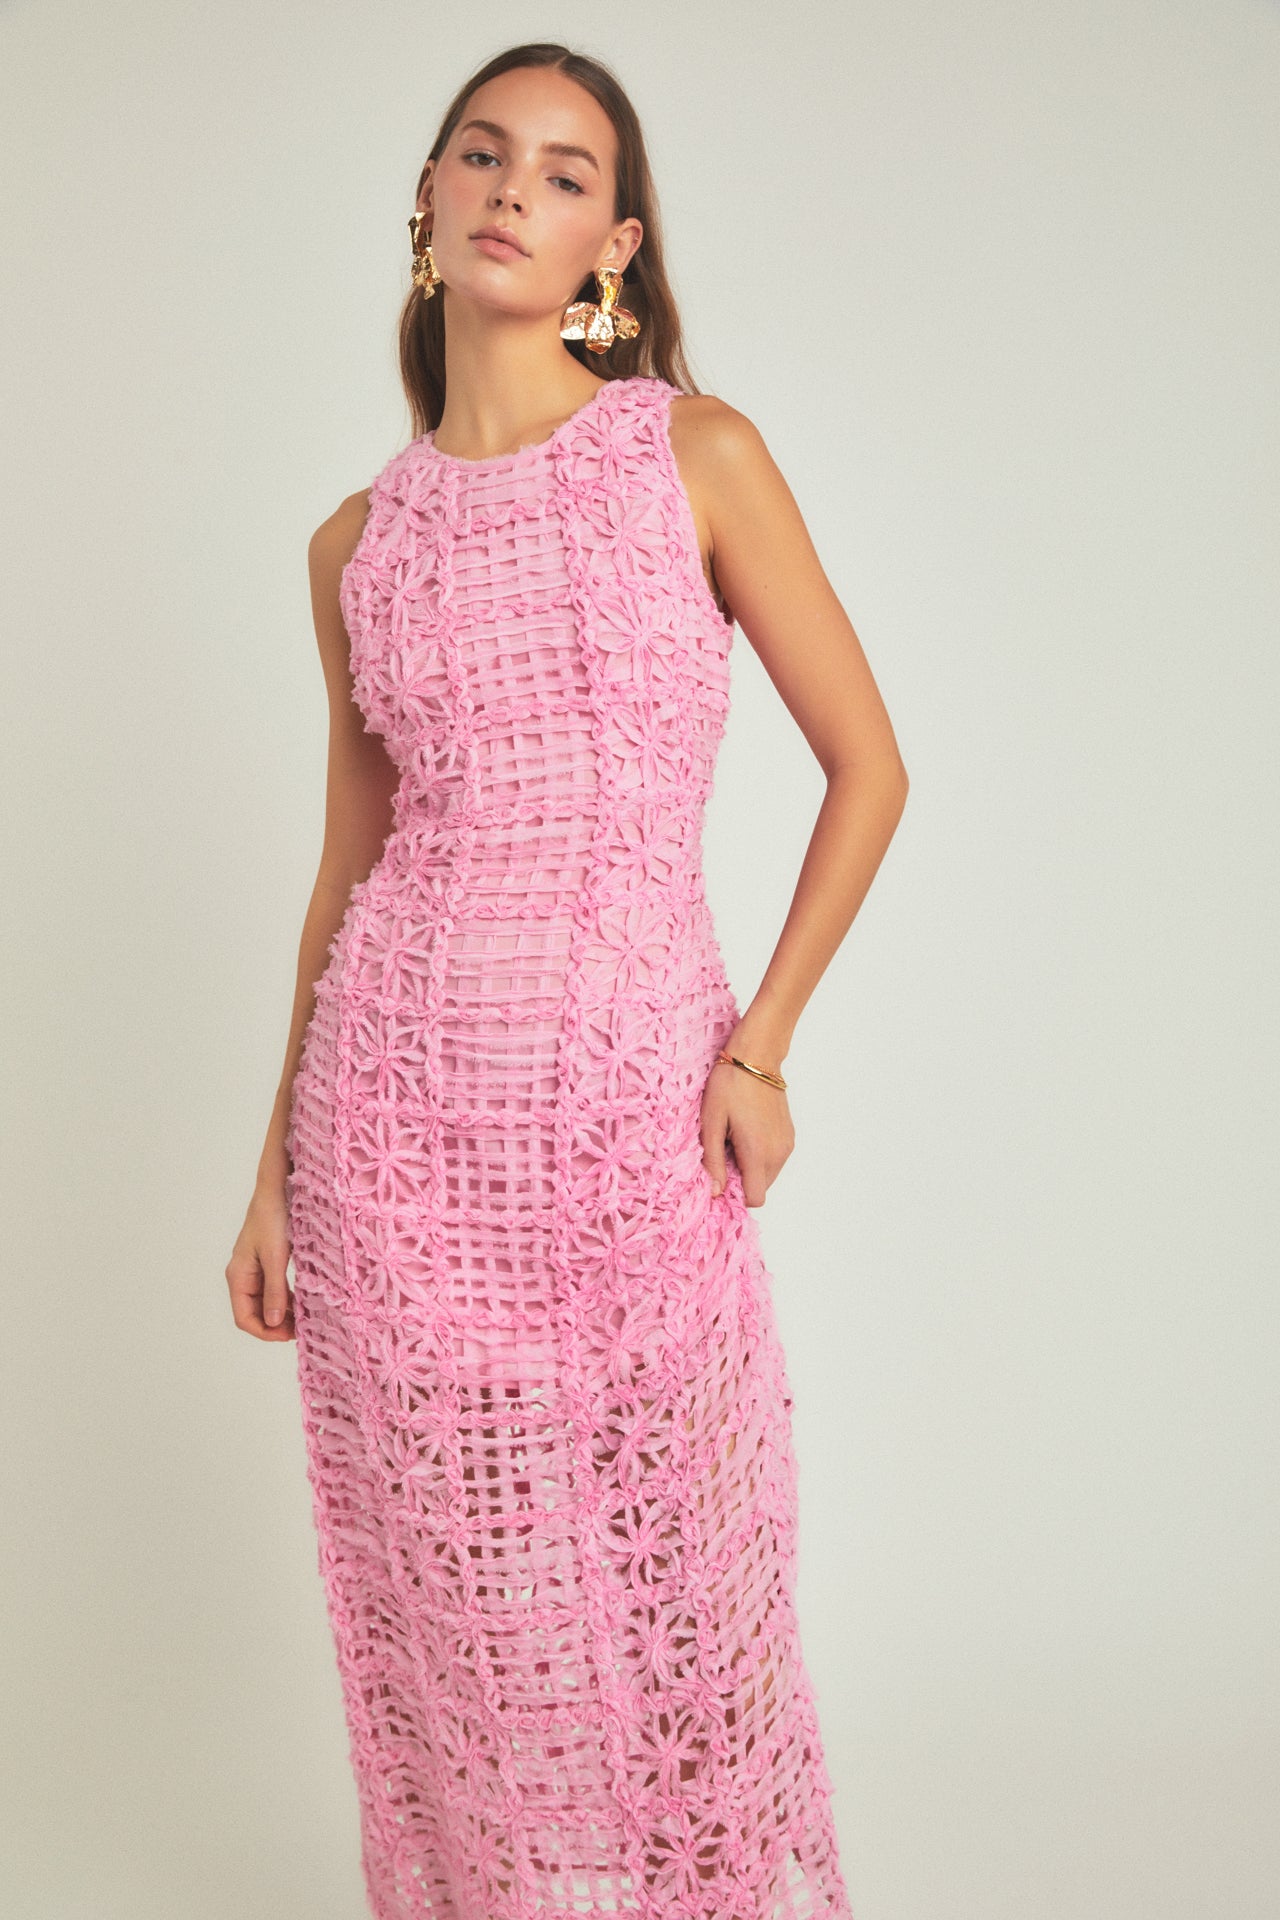 Endless Rose - Textured Sleeveless Maxi Dress Size & Fit Measurements